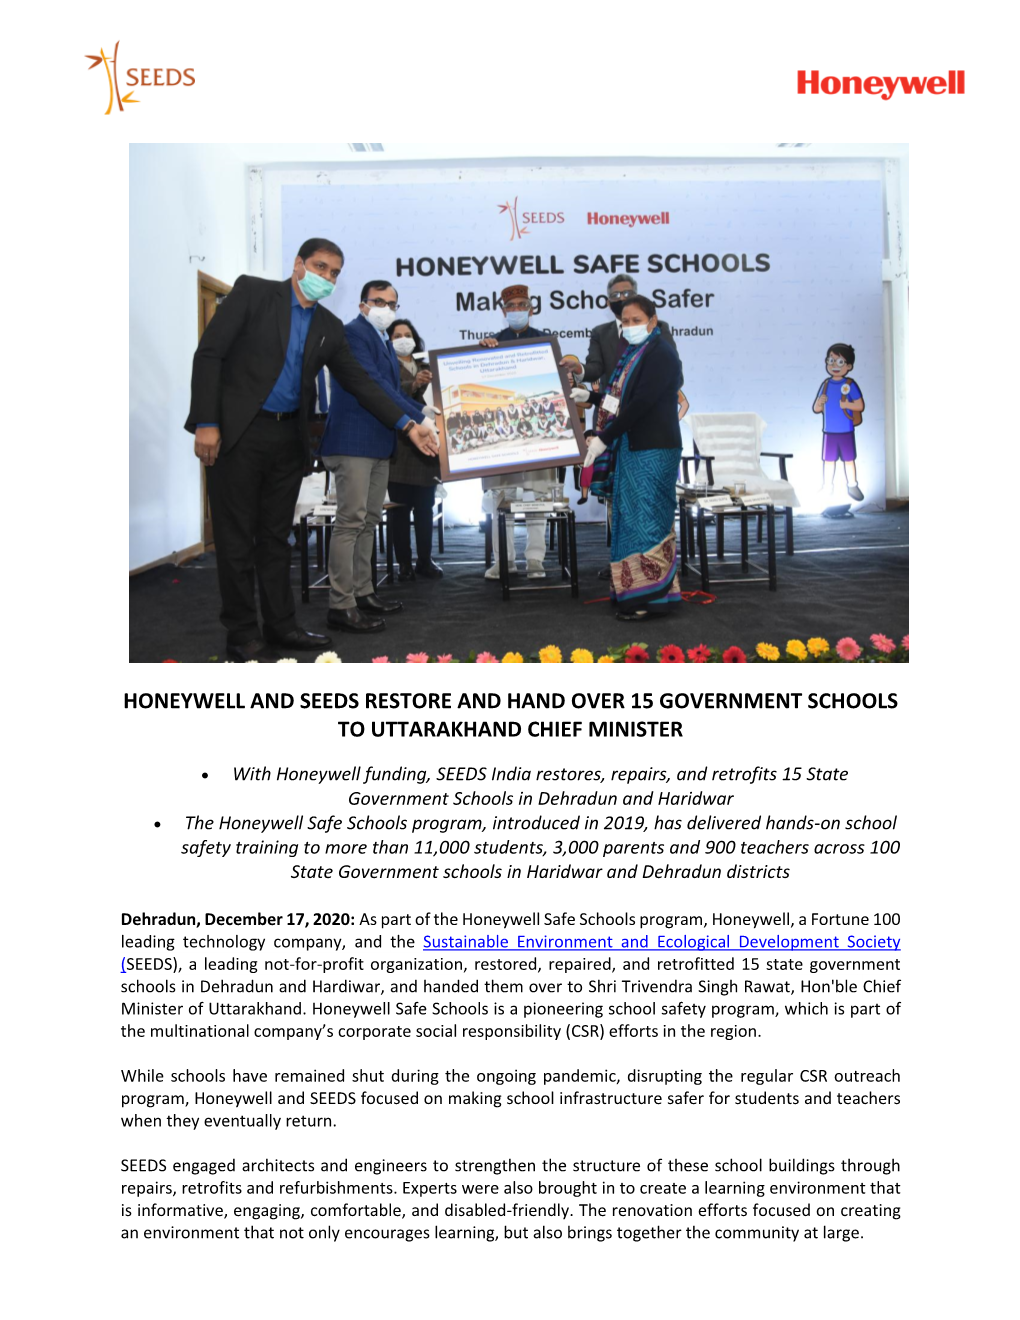 Honeywell and Seeds Restore and Hand Over 15 Government Schools to Uttarakhand Chief Minister